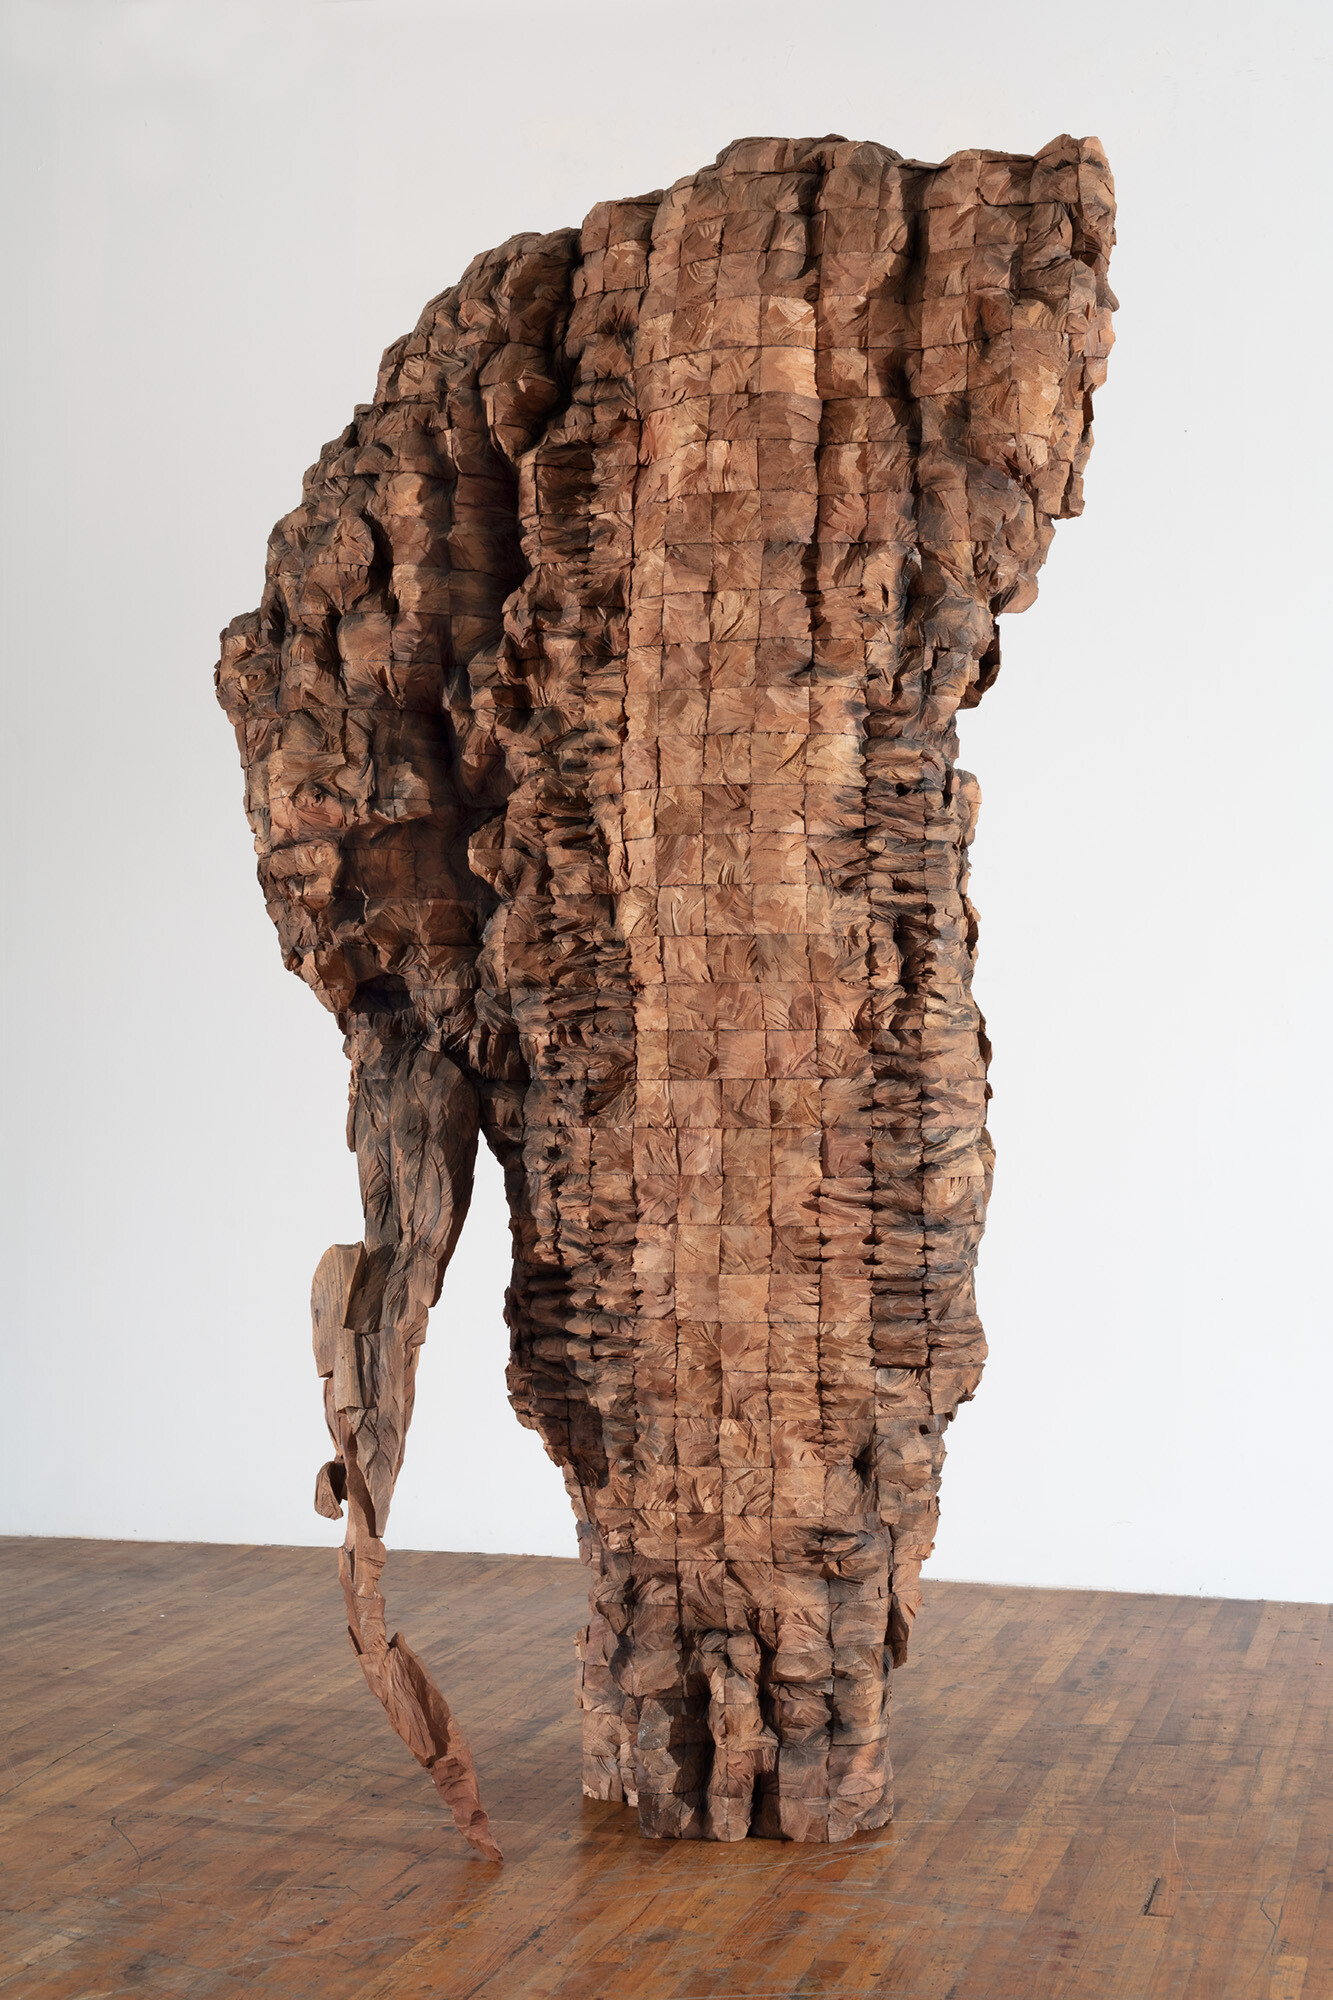 A tall, abstract wooden sculpture with a vertical, organic shape is sited on a wooden floor against a white background.